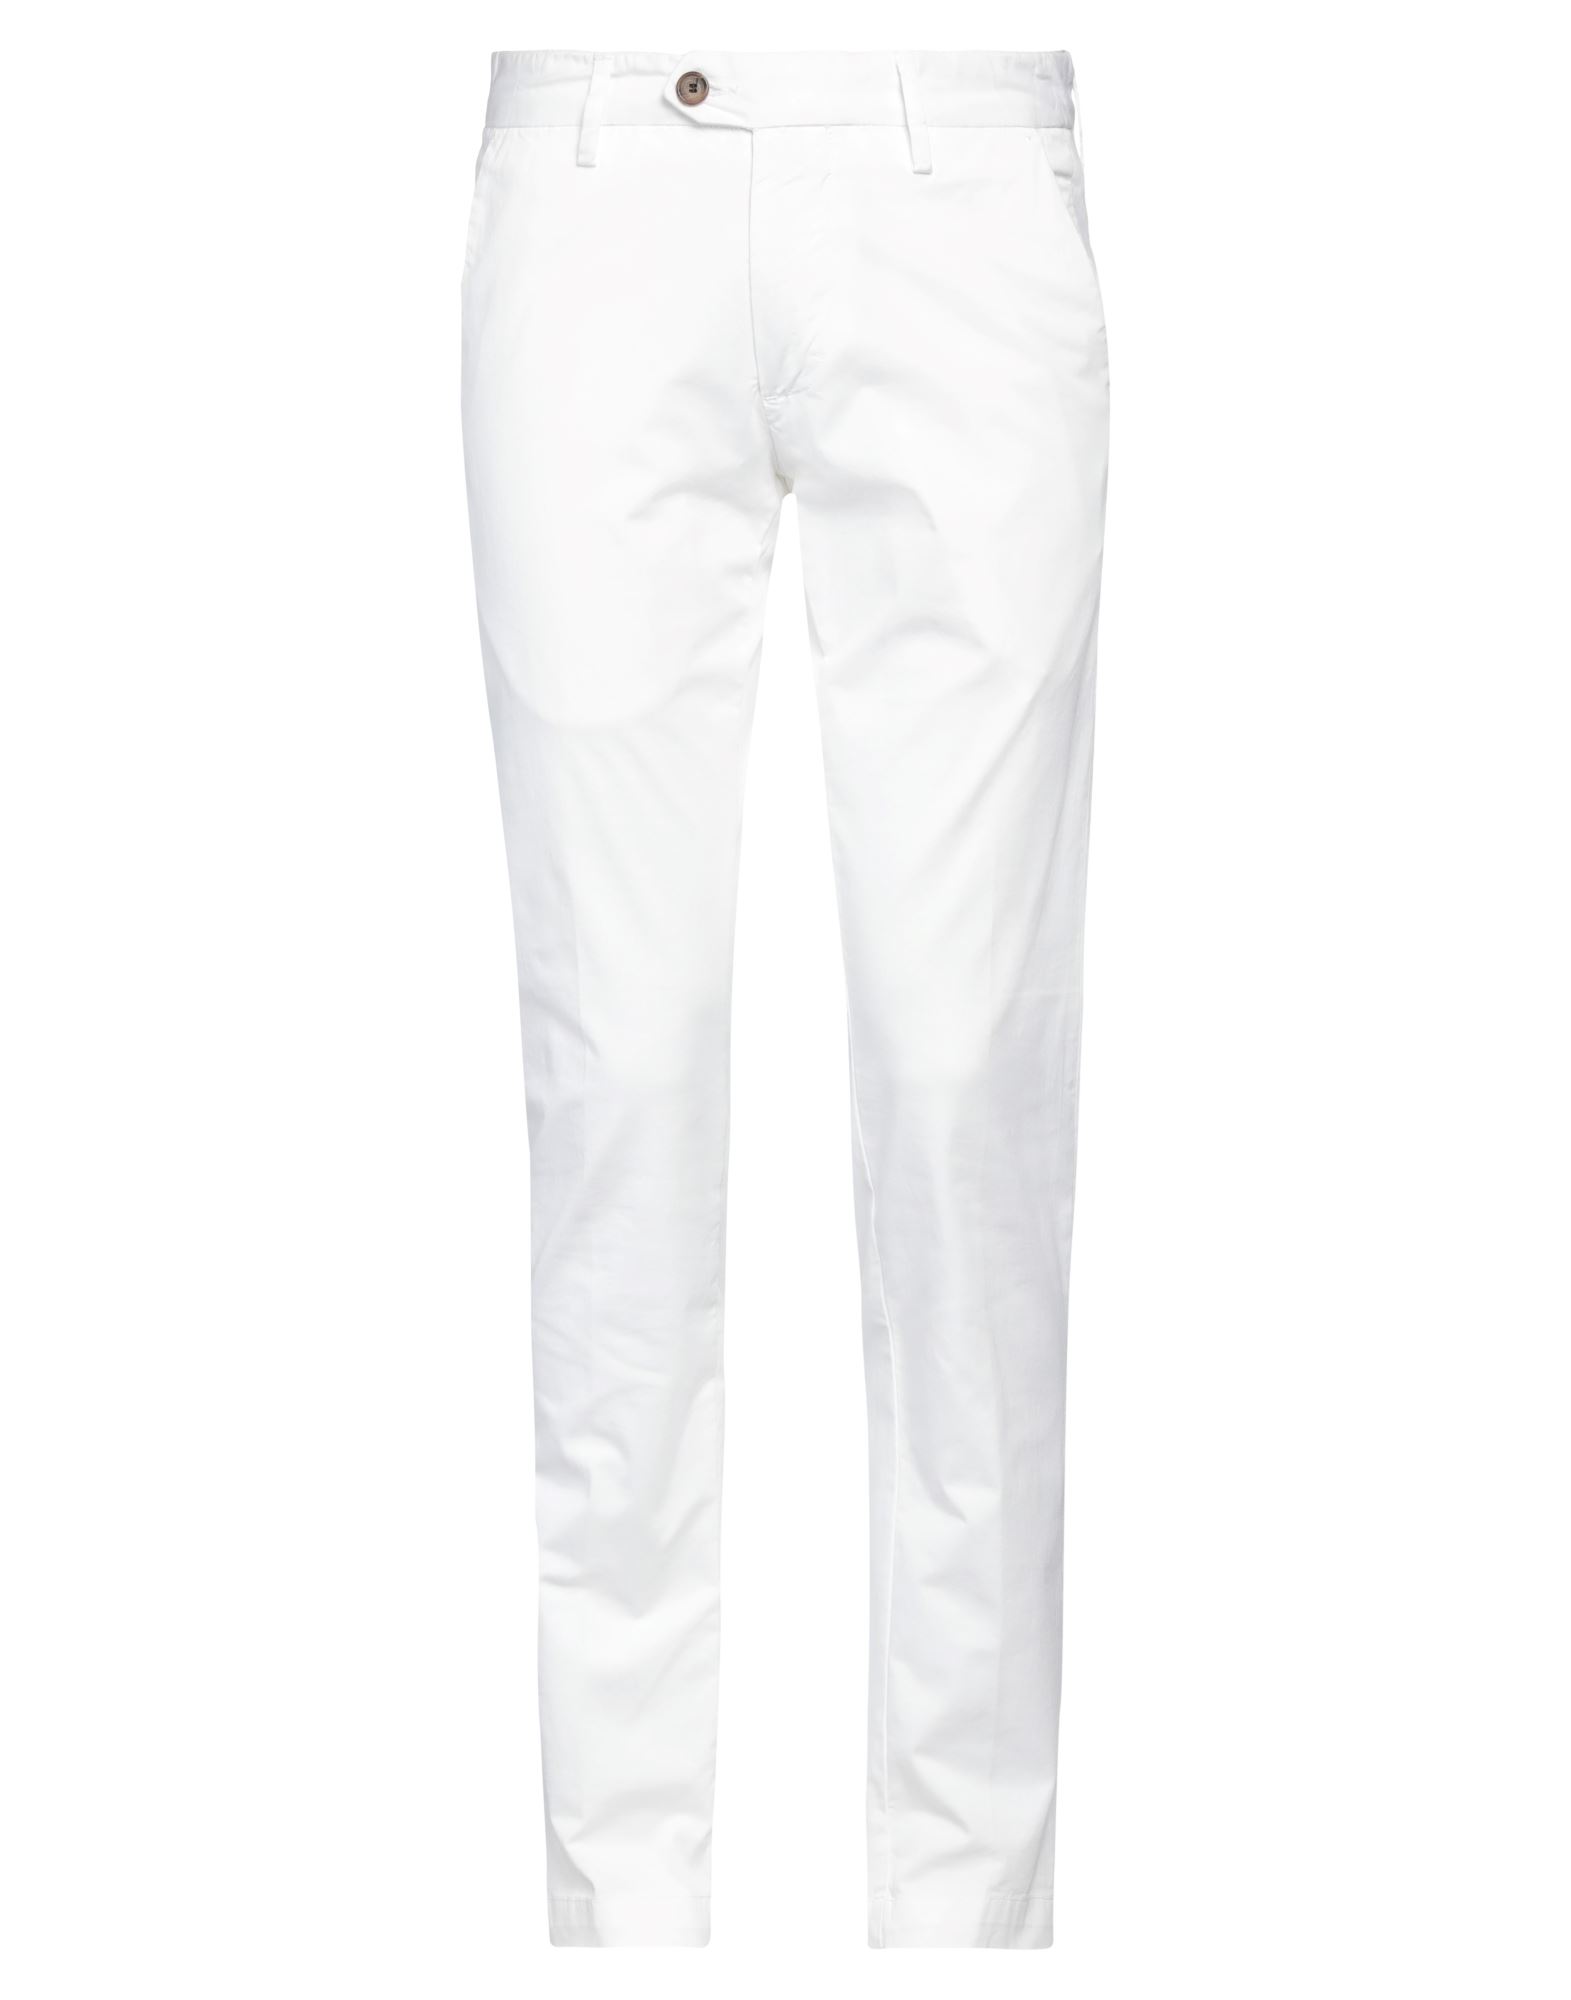 Myths Pants In White